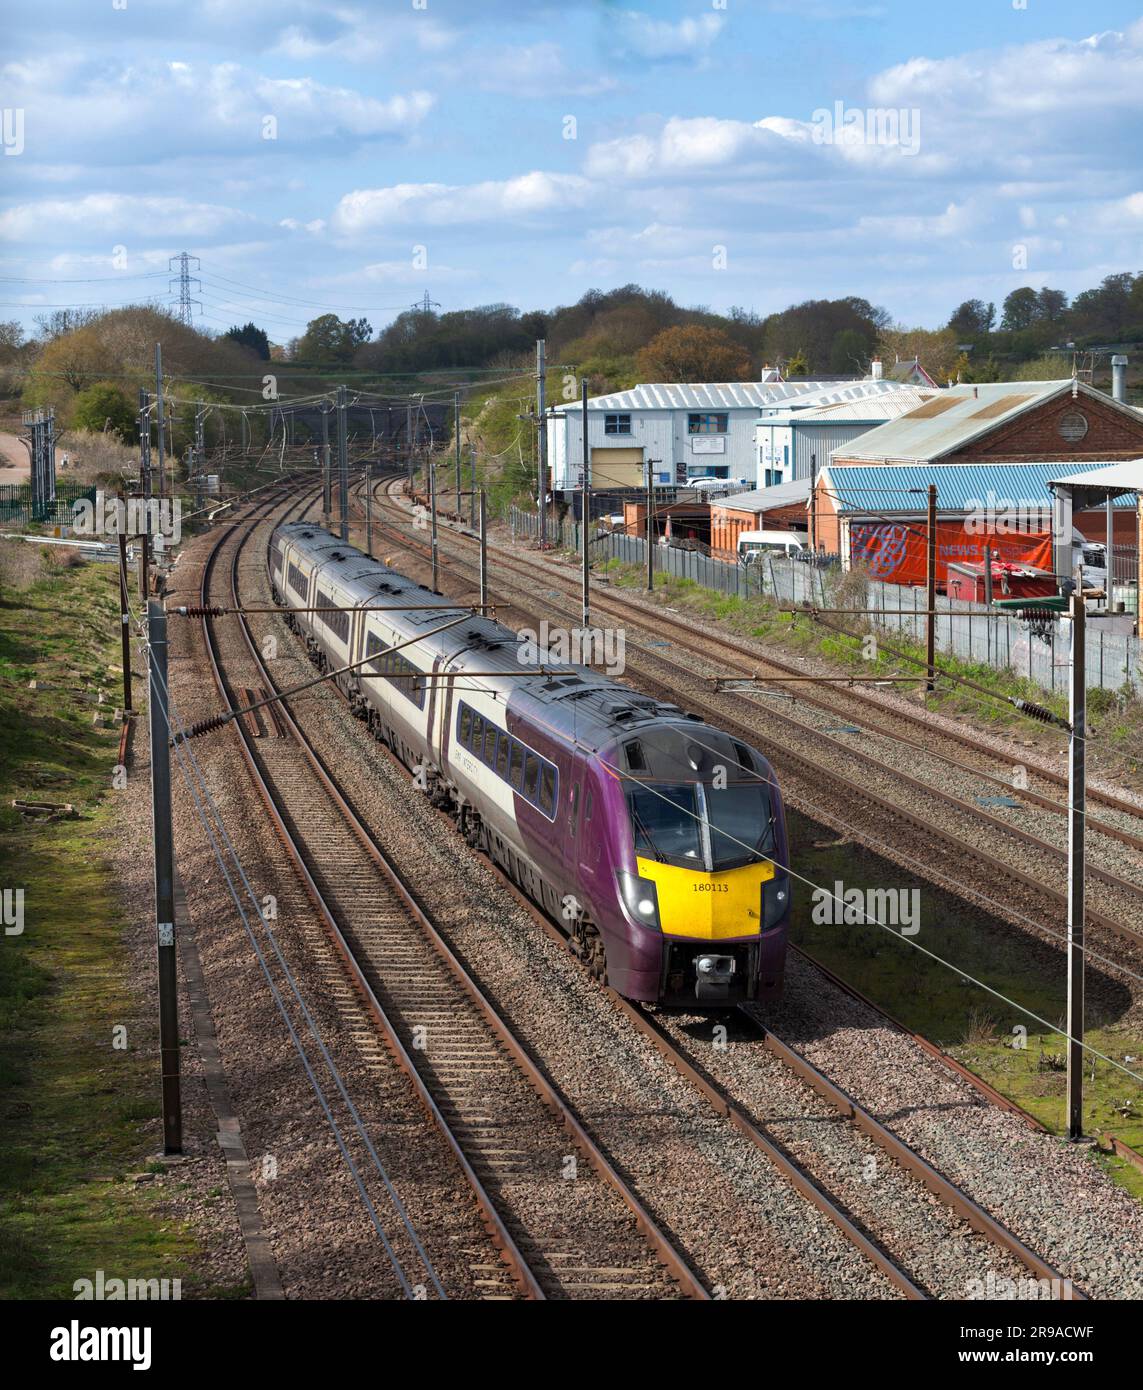 East Midlands railway class 180 diesel train on the electrified 4 track Midland Mainline passing Ampthill, Bedfordshire Stock Photo